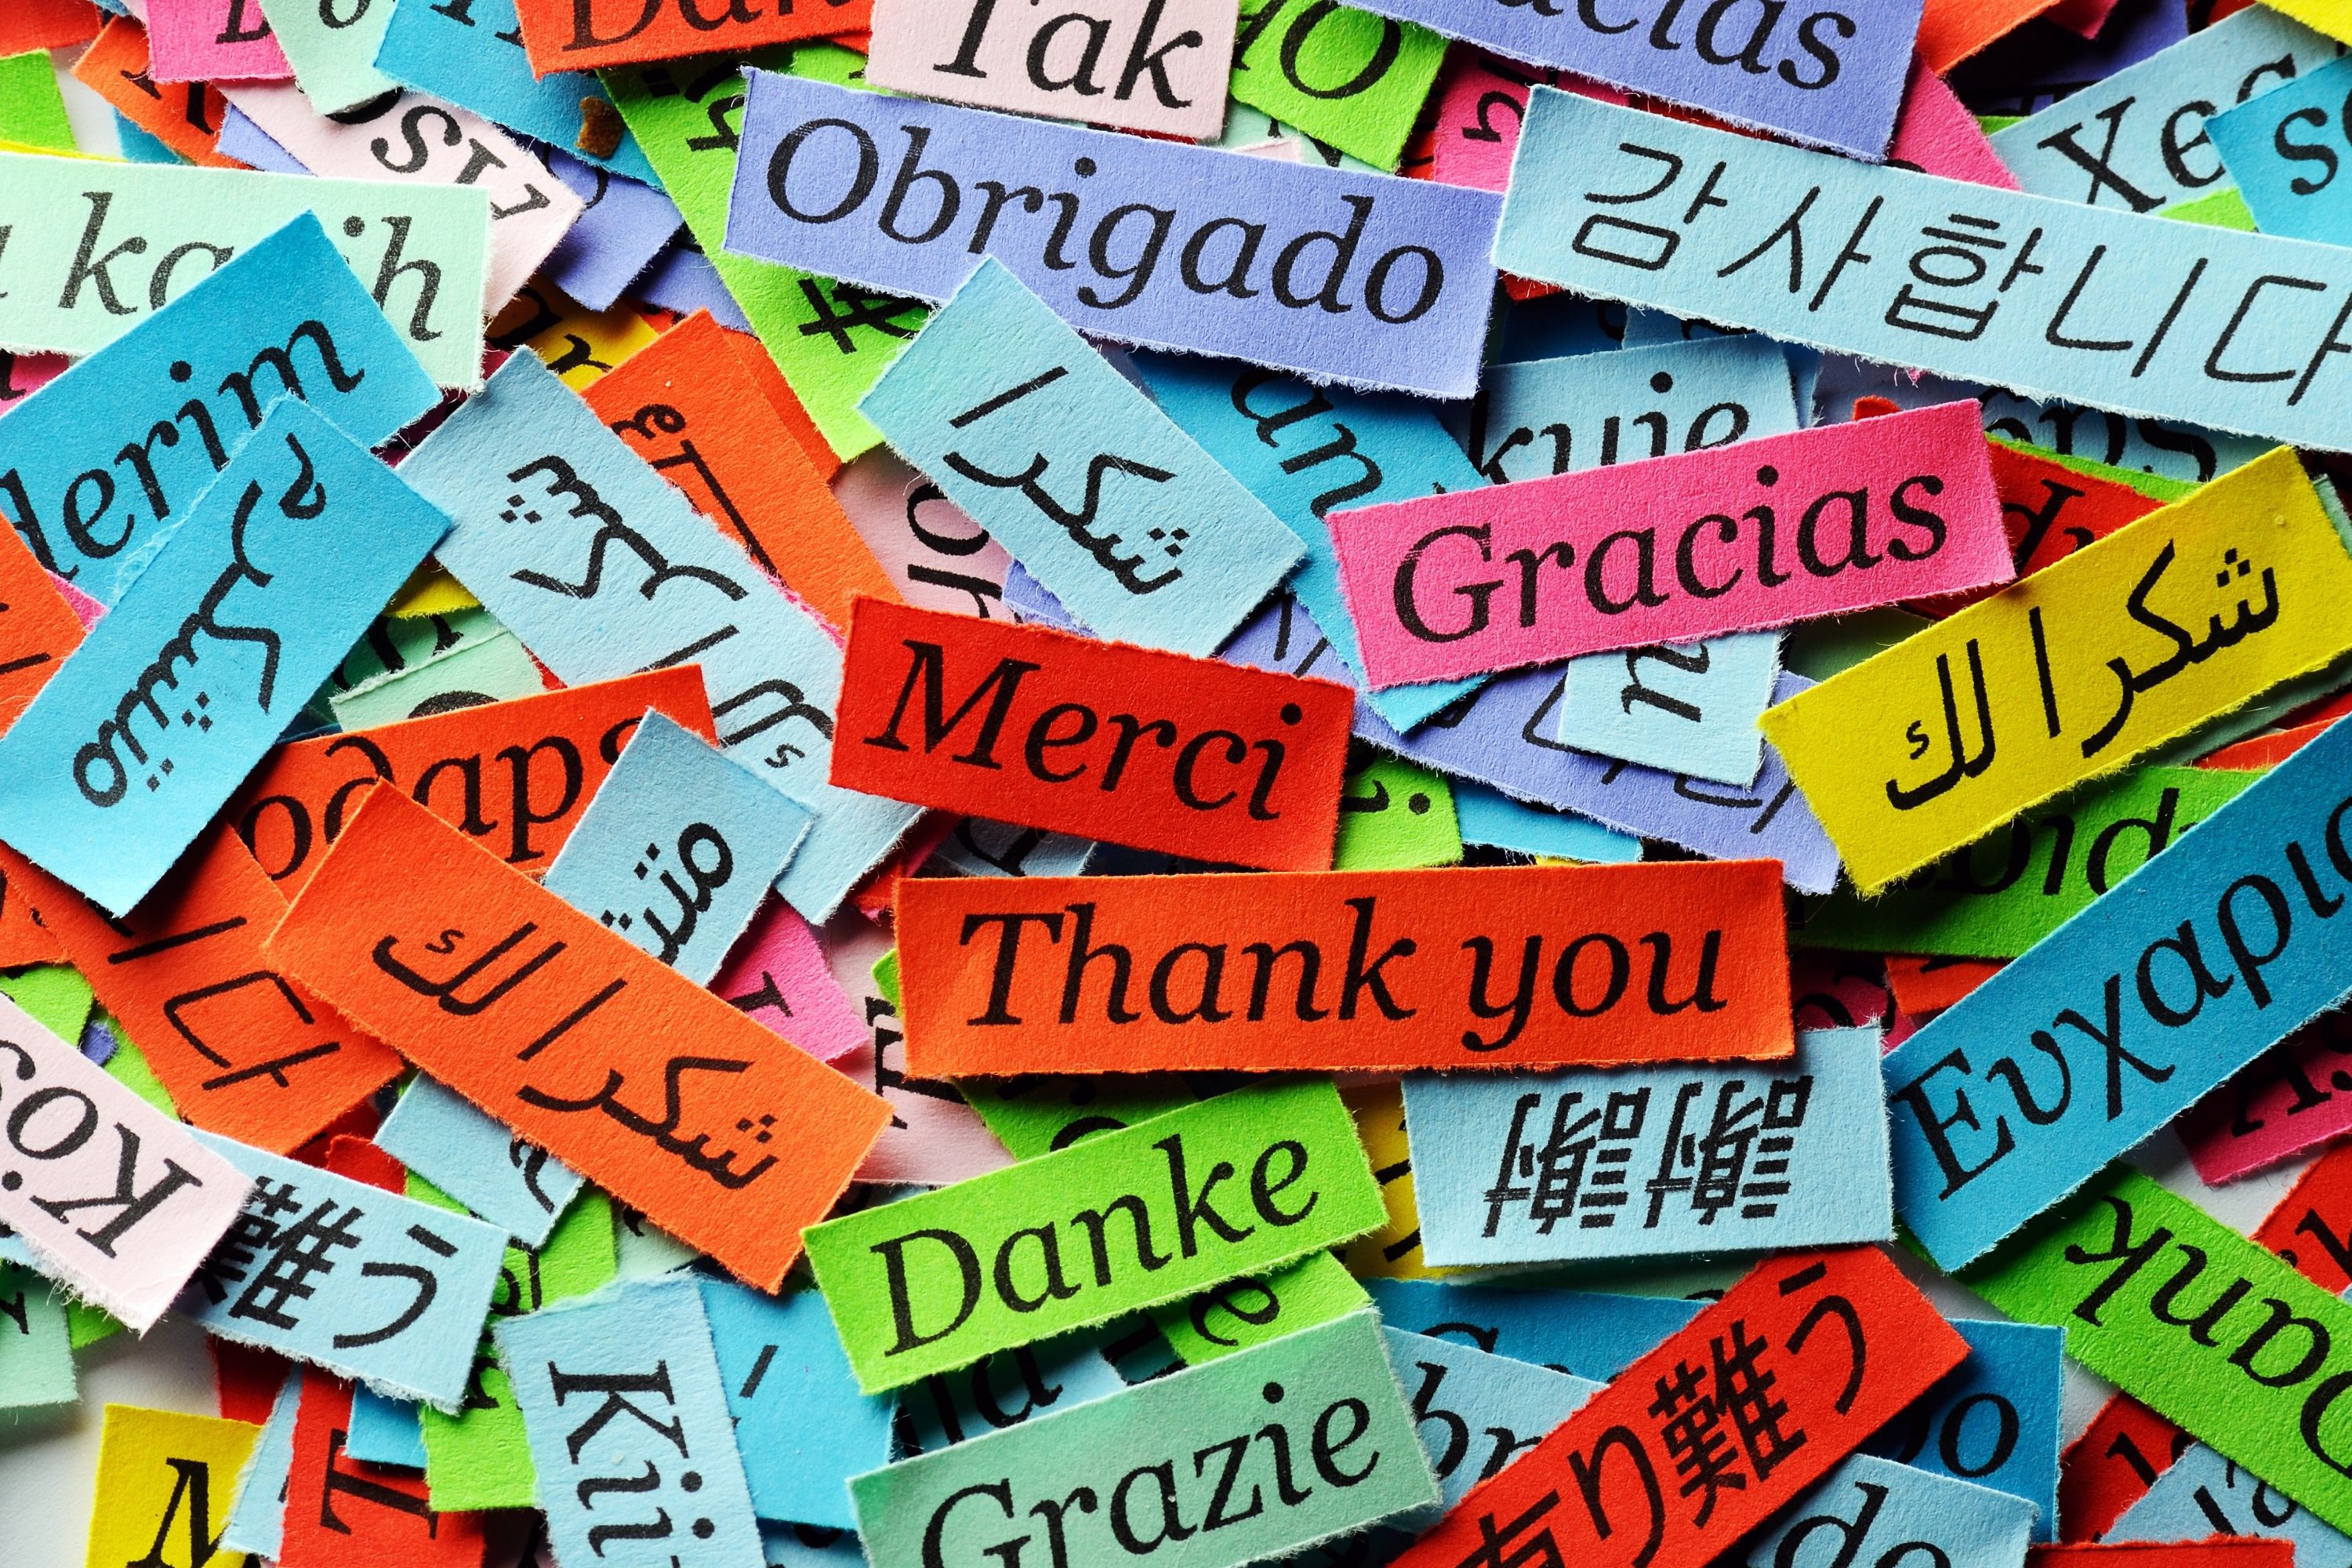 How Do We Say “Thank You” In Other Languages (2)